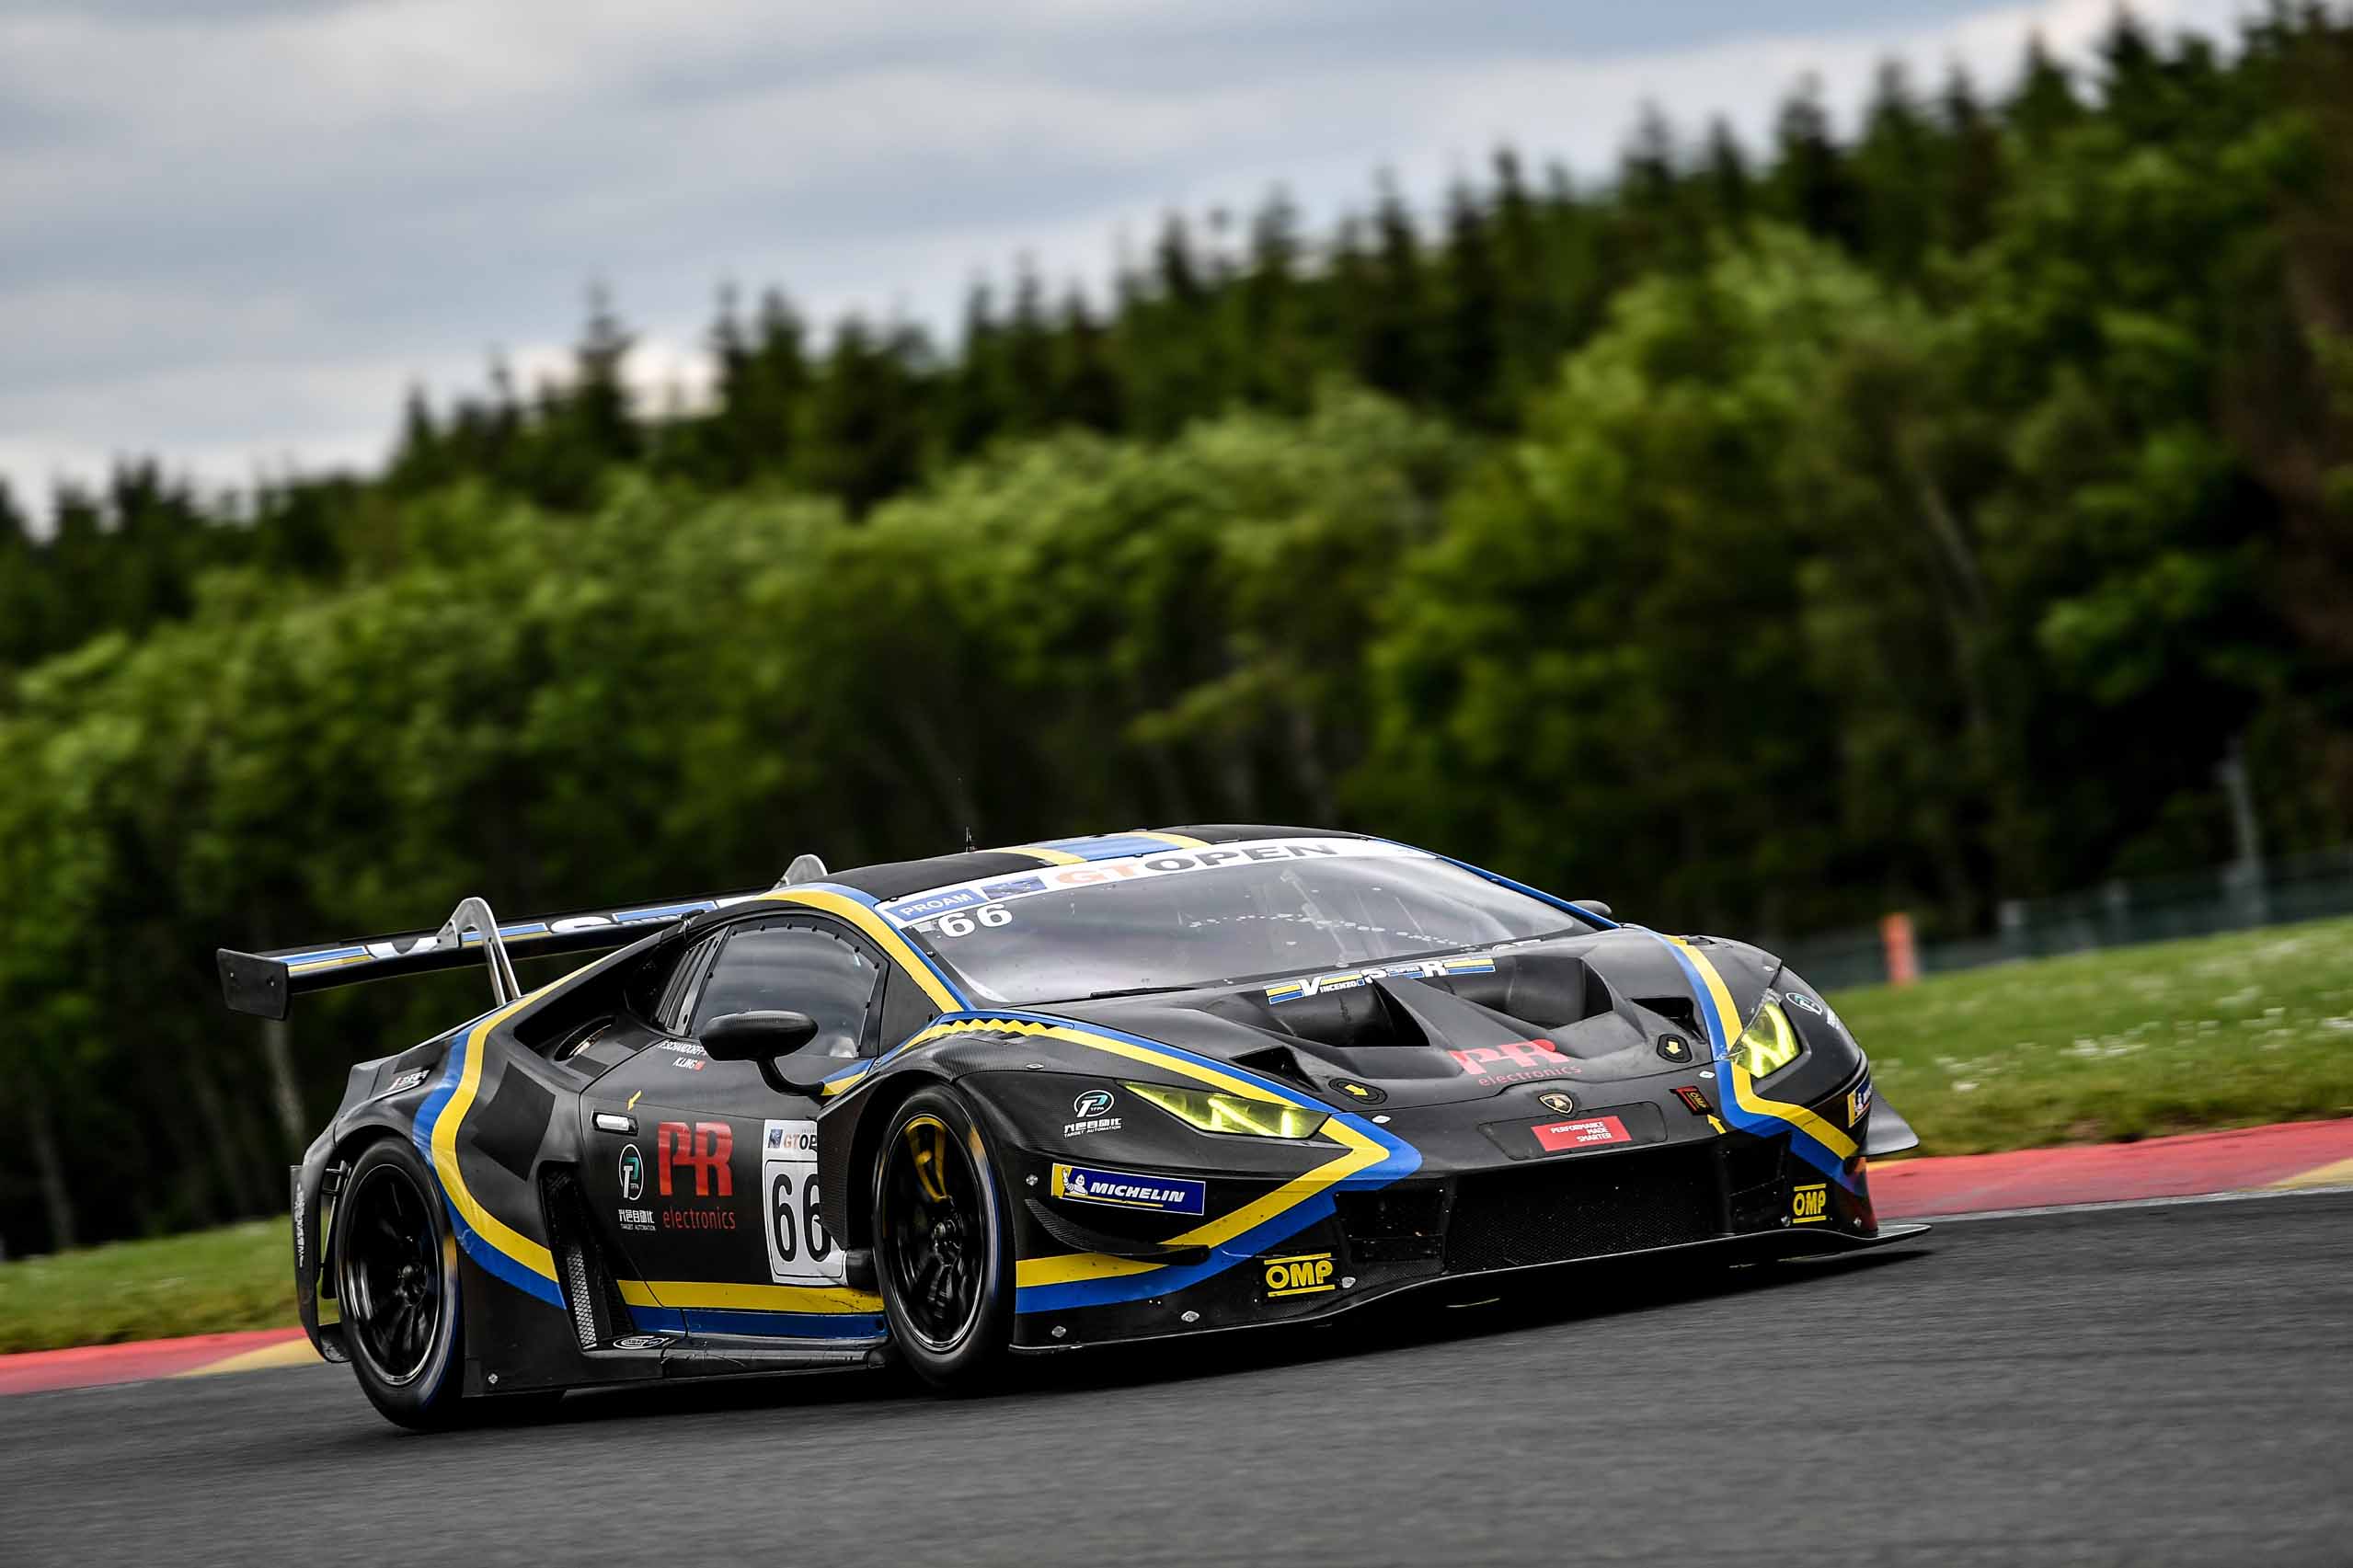 SPA PODIUM KEEPS LING AND SCHANDORFF IN CHAMPIONSHIP HUNT